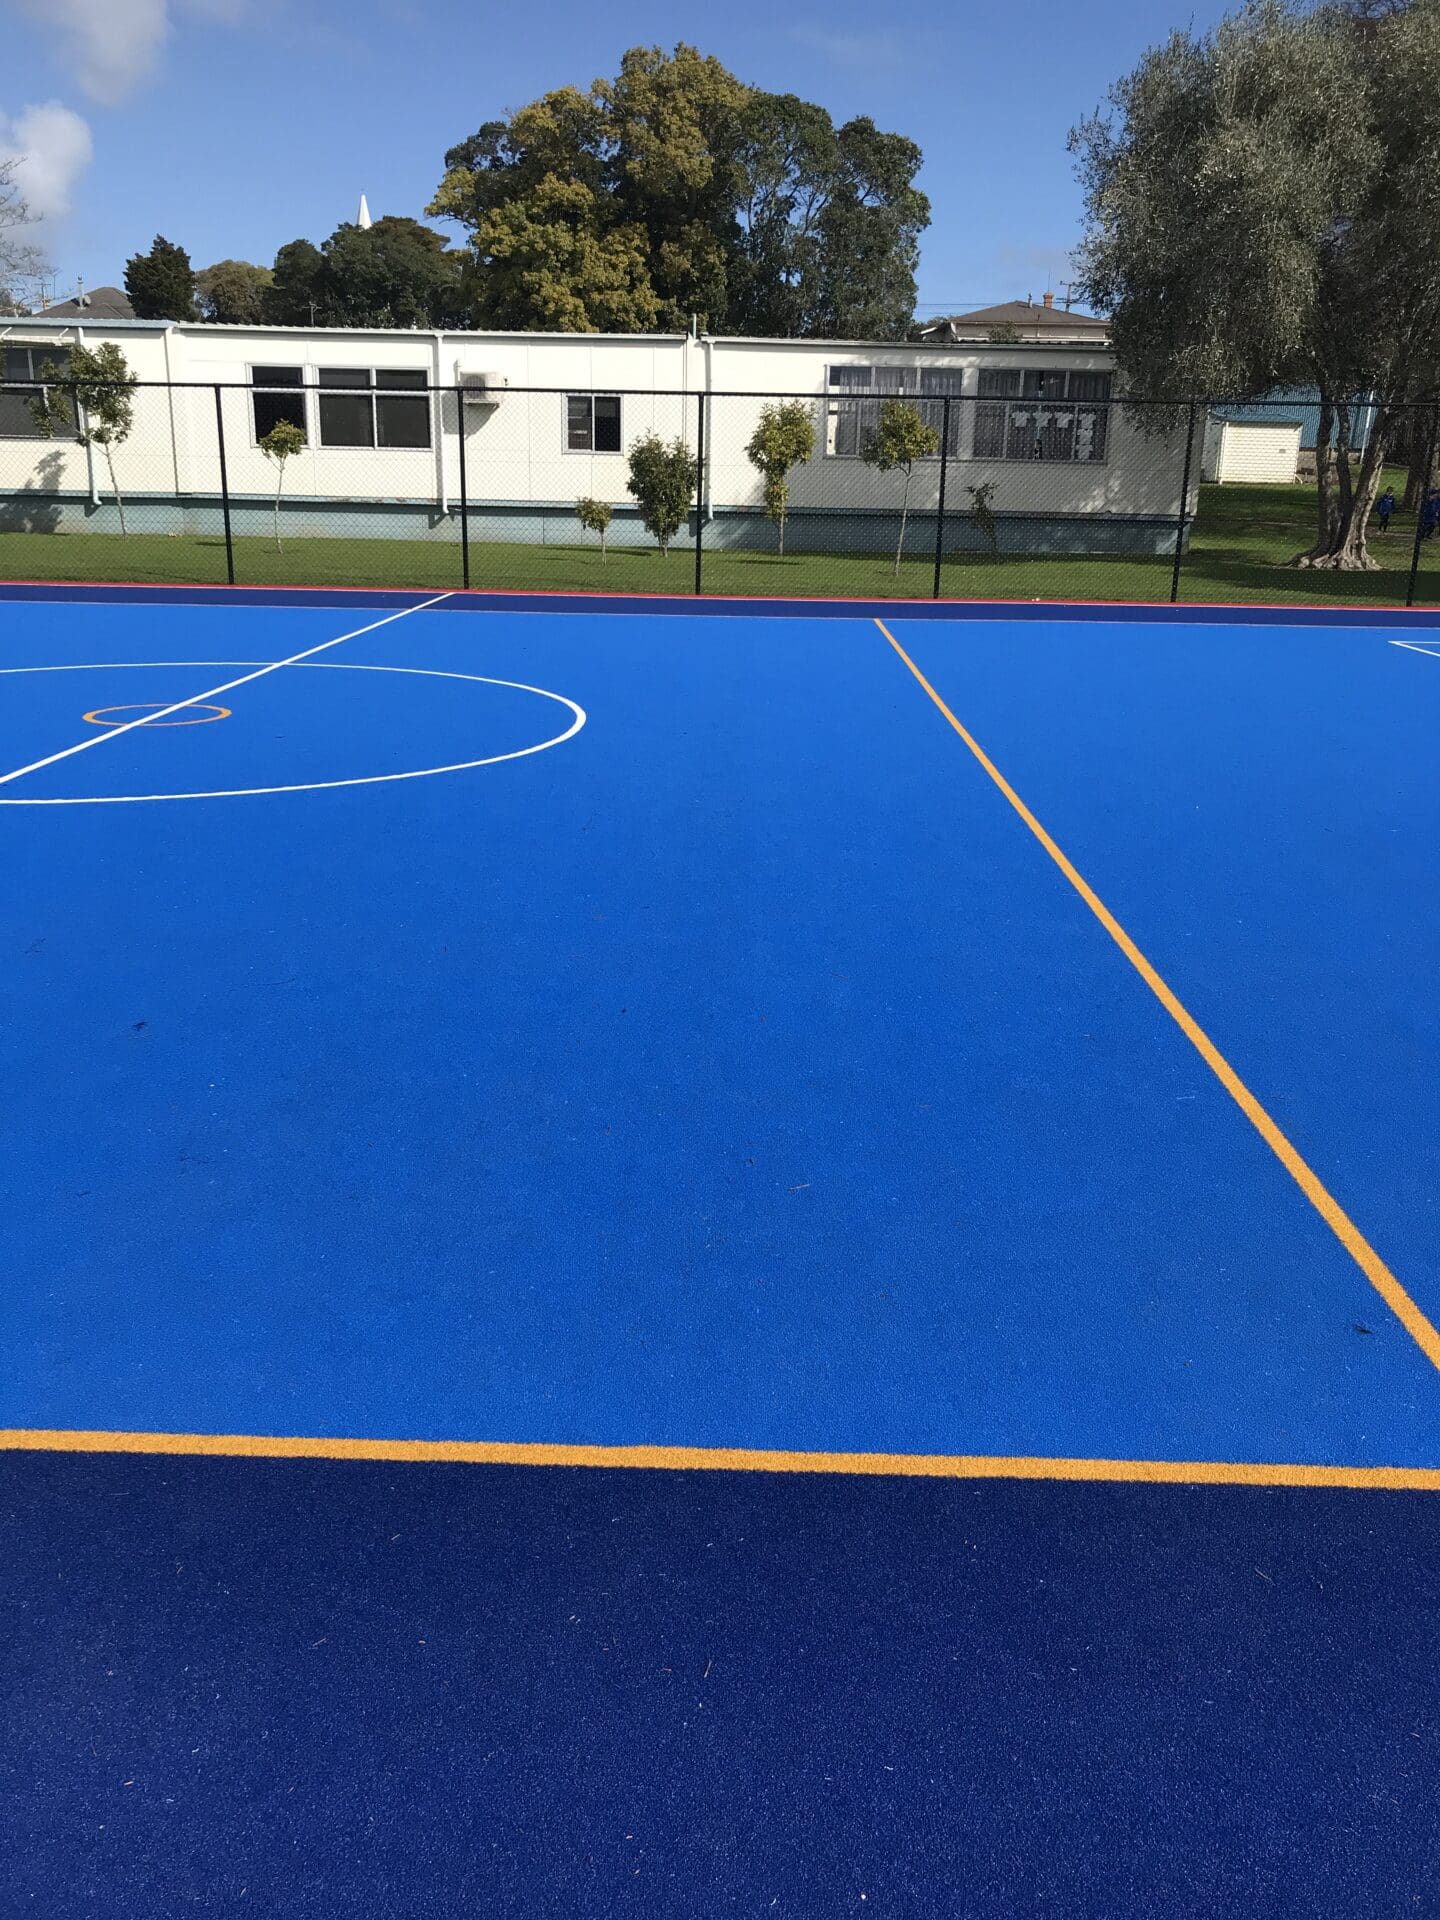 The TigerTurf Advantage all-weather multi-sport court is in play every day of the year